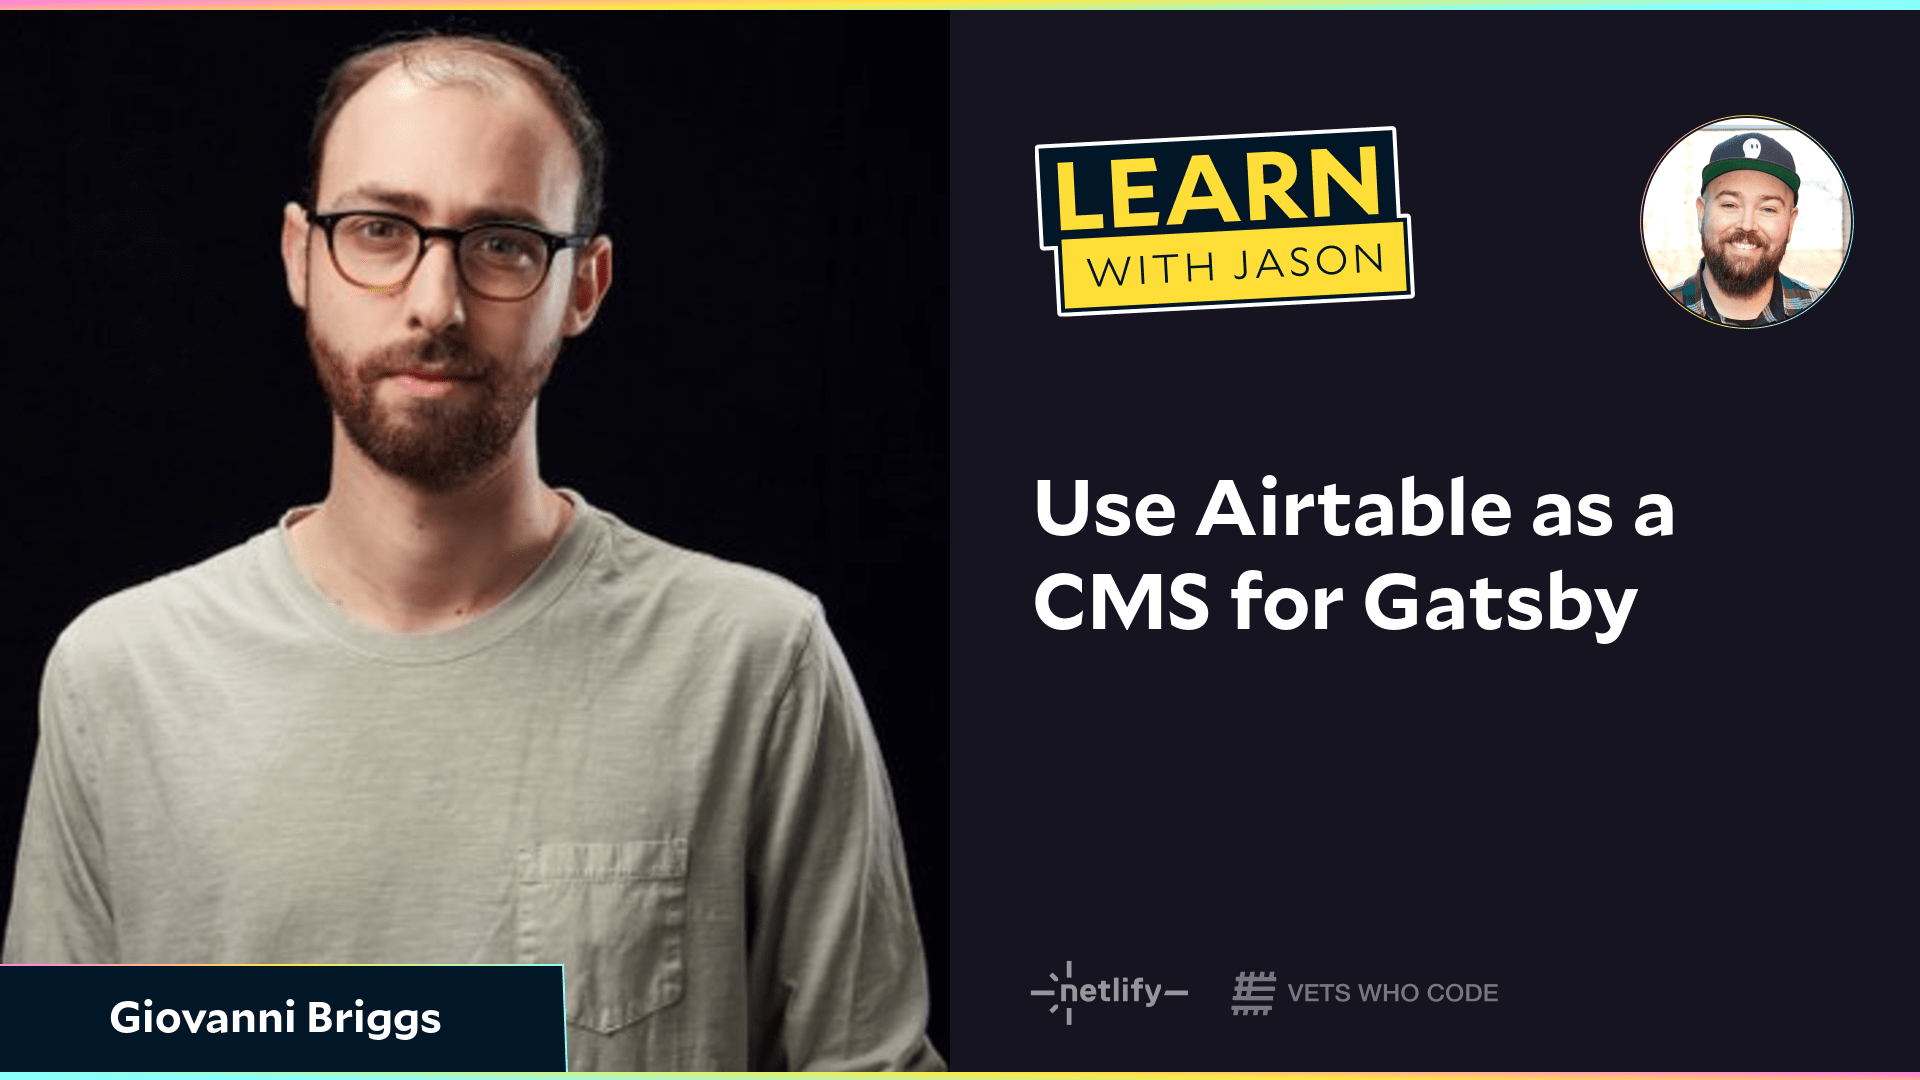 Use Airtable as a CMS for Gatsby (with Giovanni Briggs)